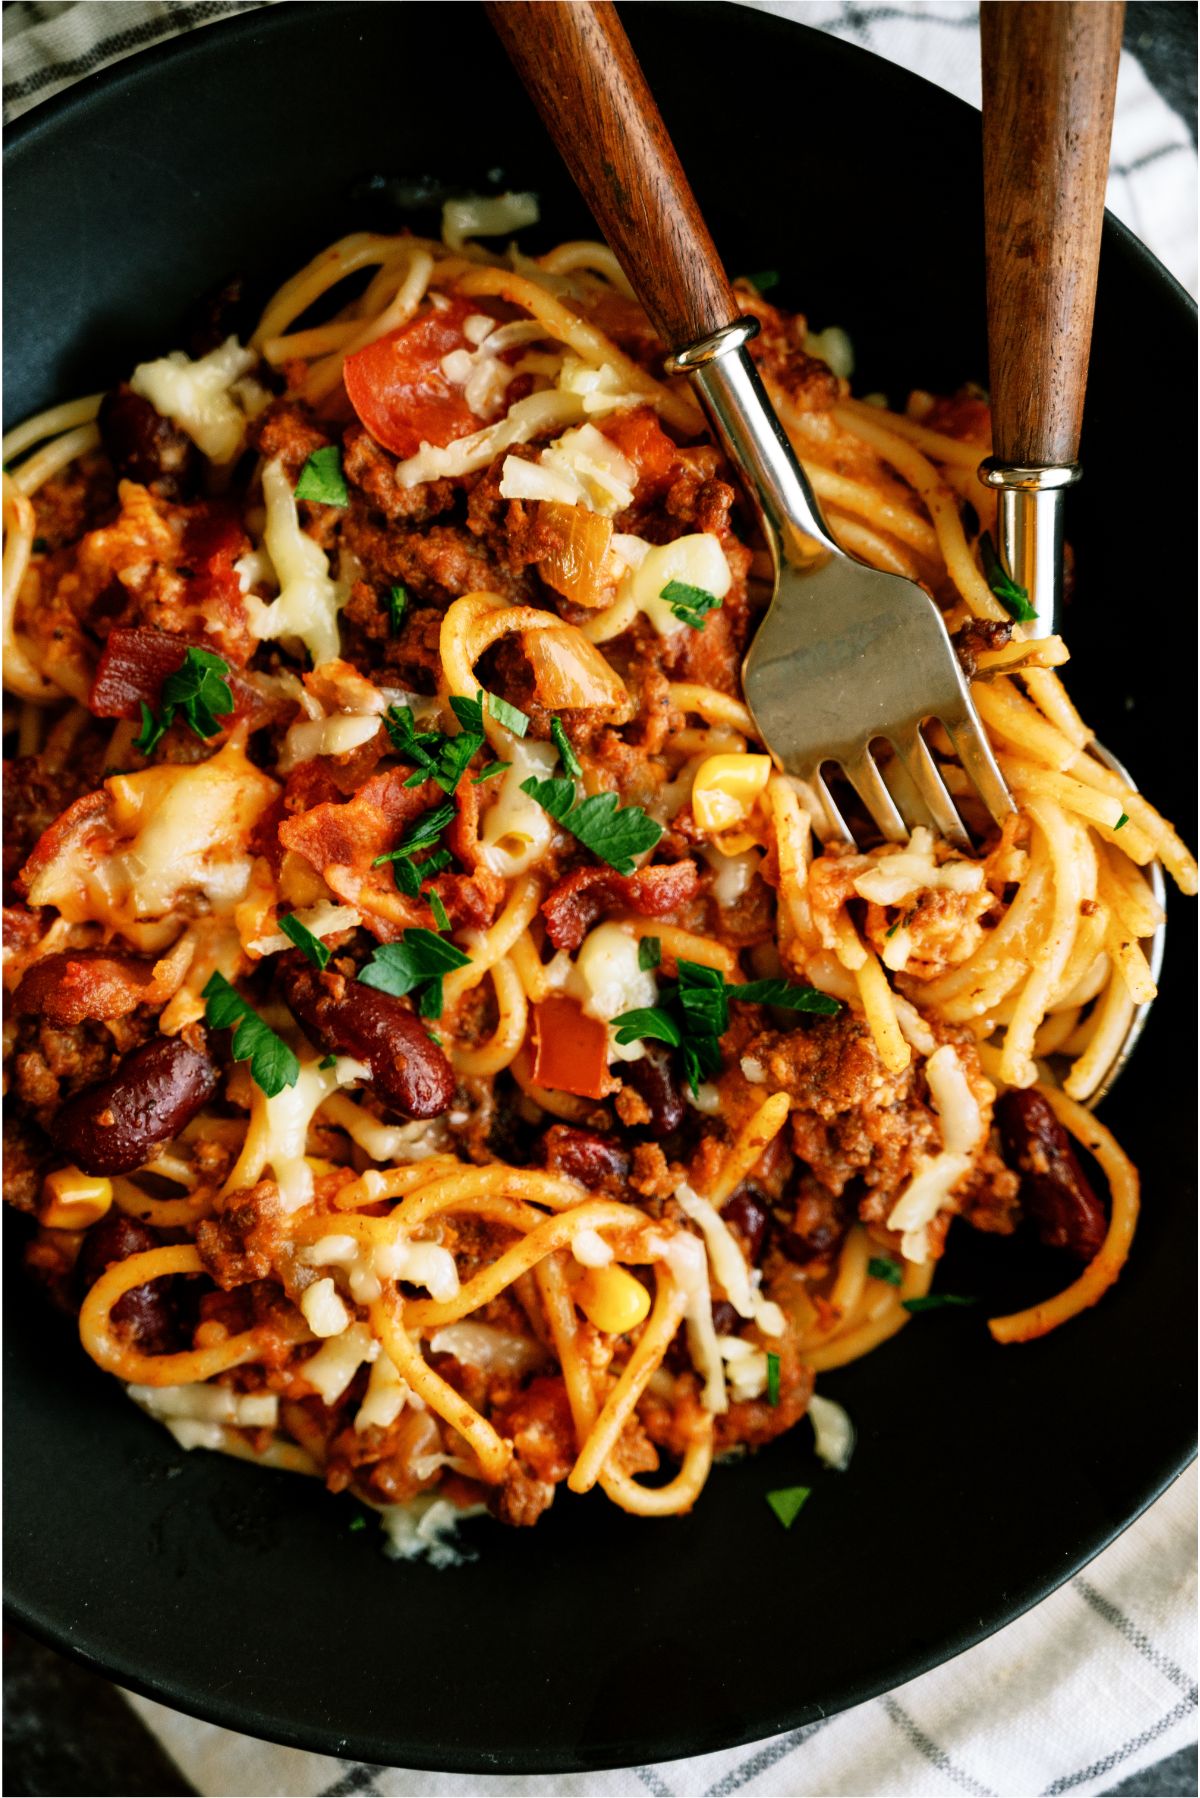 A serving of Skillet Cowboy Spaghetti on a plate with a fork and spoon